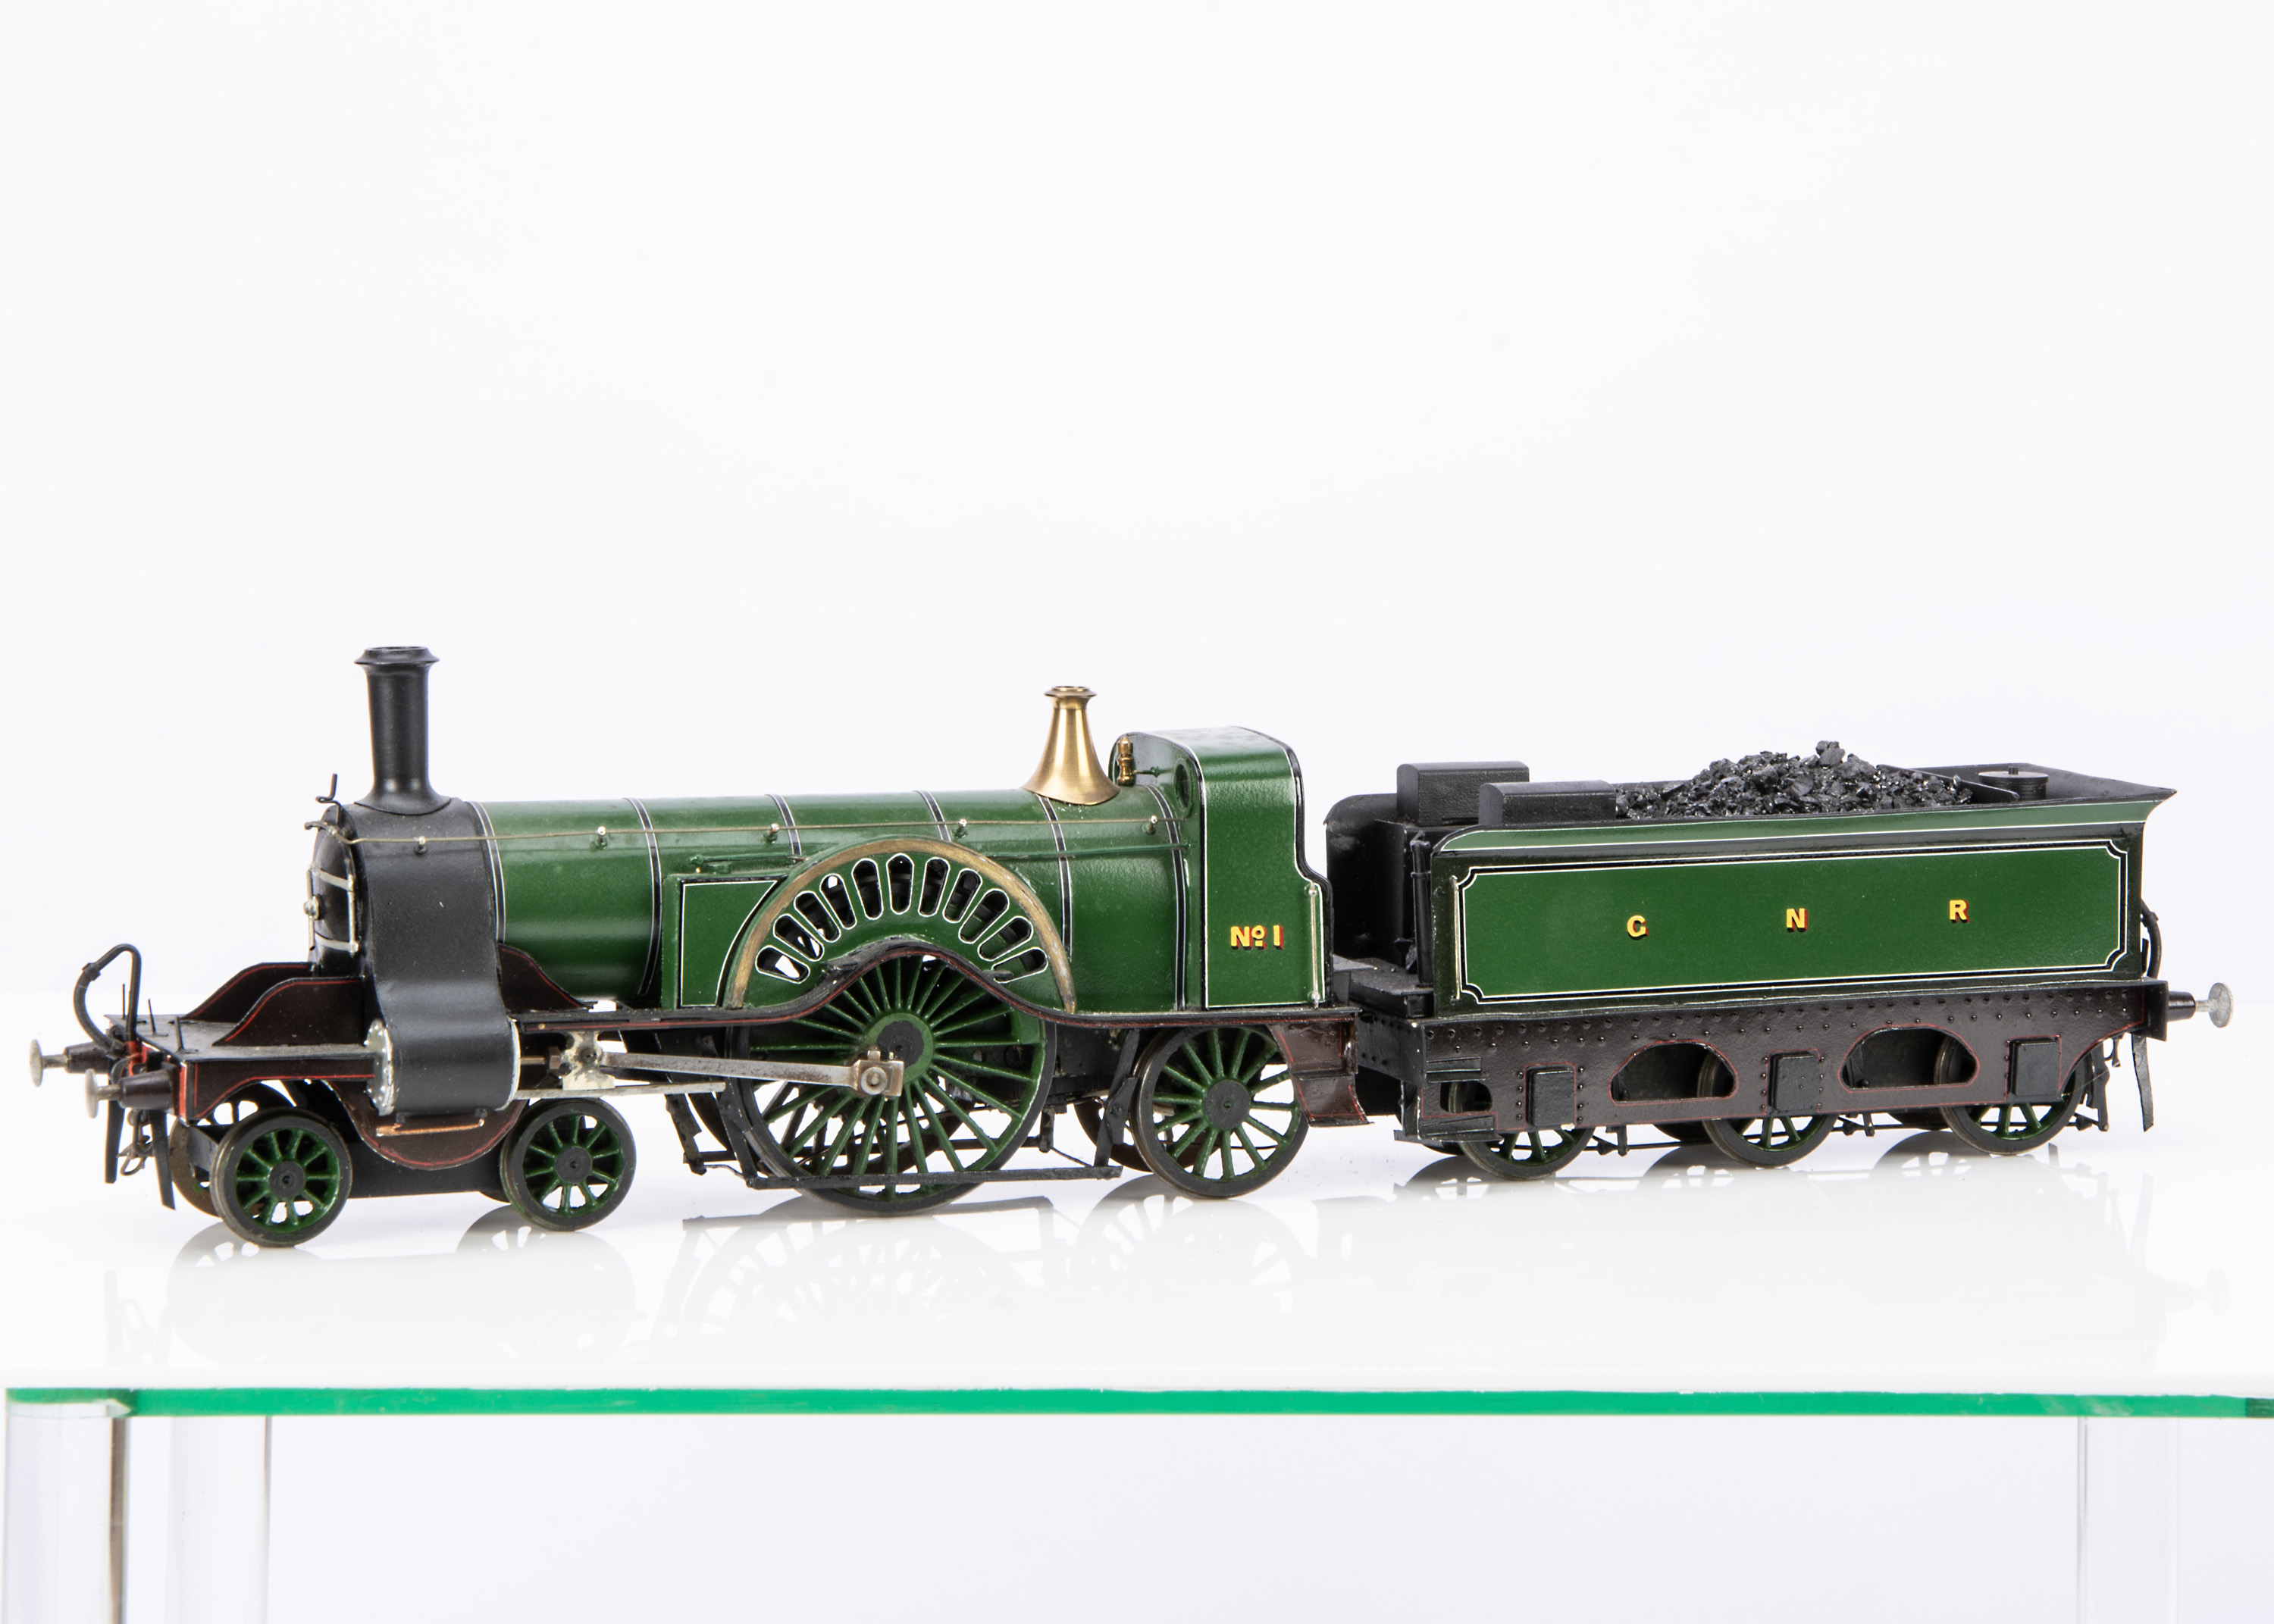 Lot 22 - Unknown make Kit/Scratch built 0 Gauge 4-2-2 Loco & Tender GNR (Great Northern Railway) lined green 'Sterling Single' No.1, 2-rail finescale electric